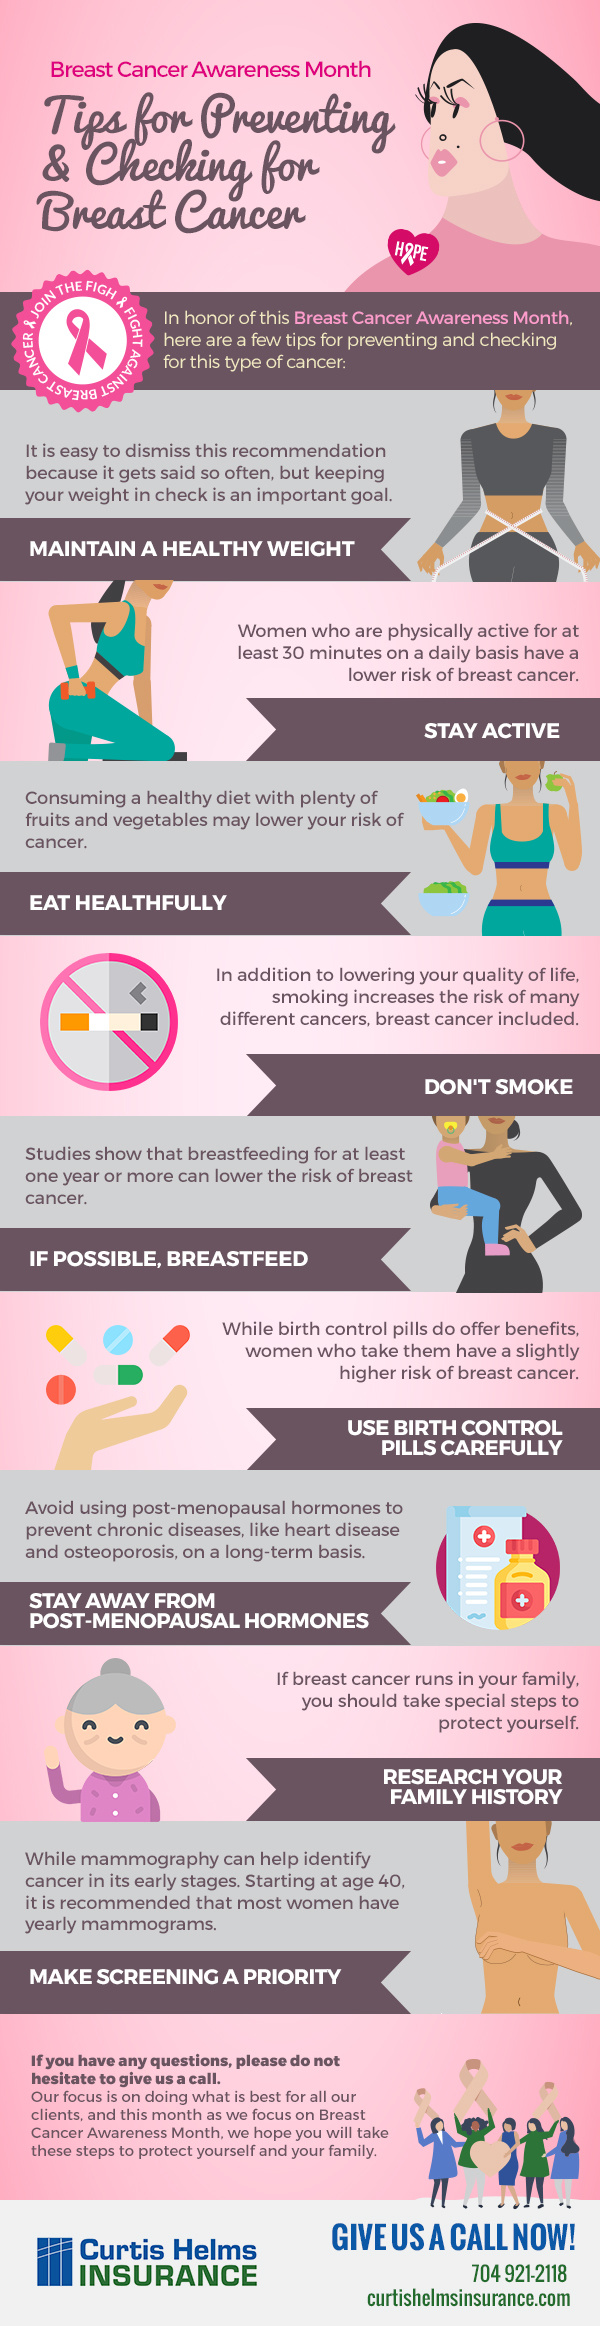 Breast Cancer Awareness Month: Tips for Preventing & Checking for Breast Cancer [infographic]